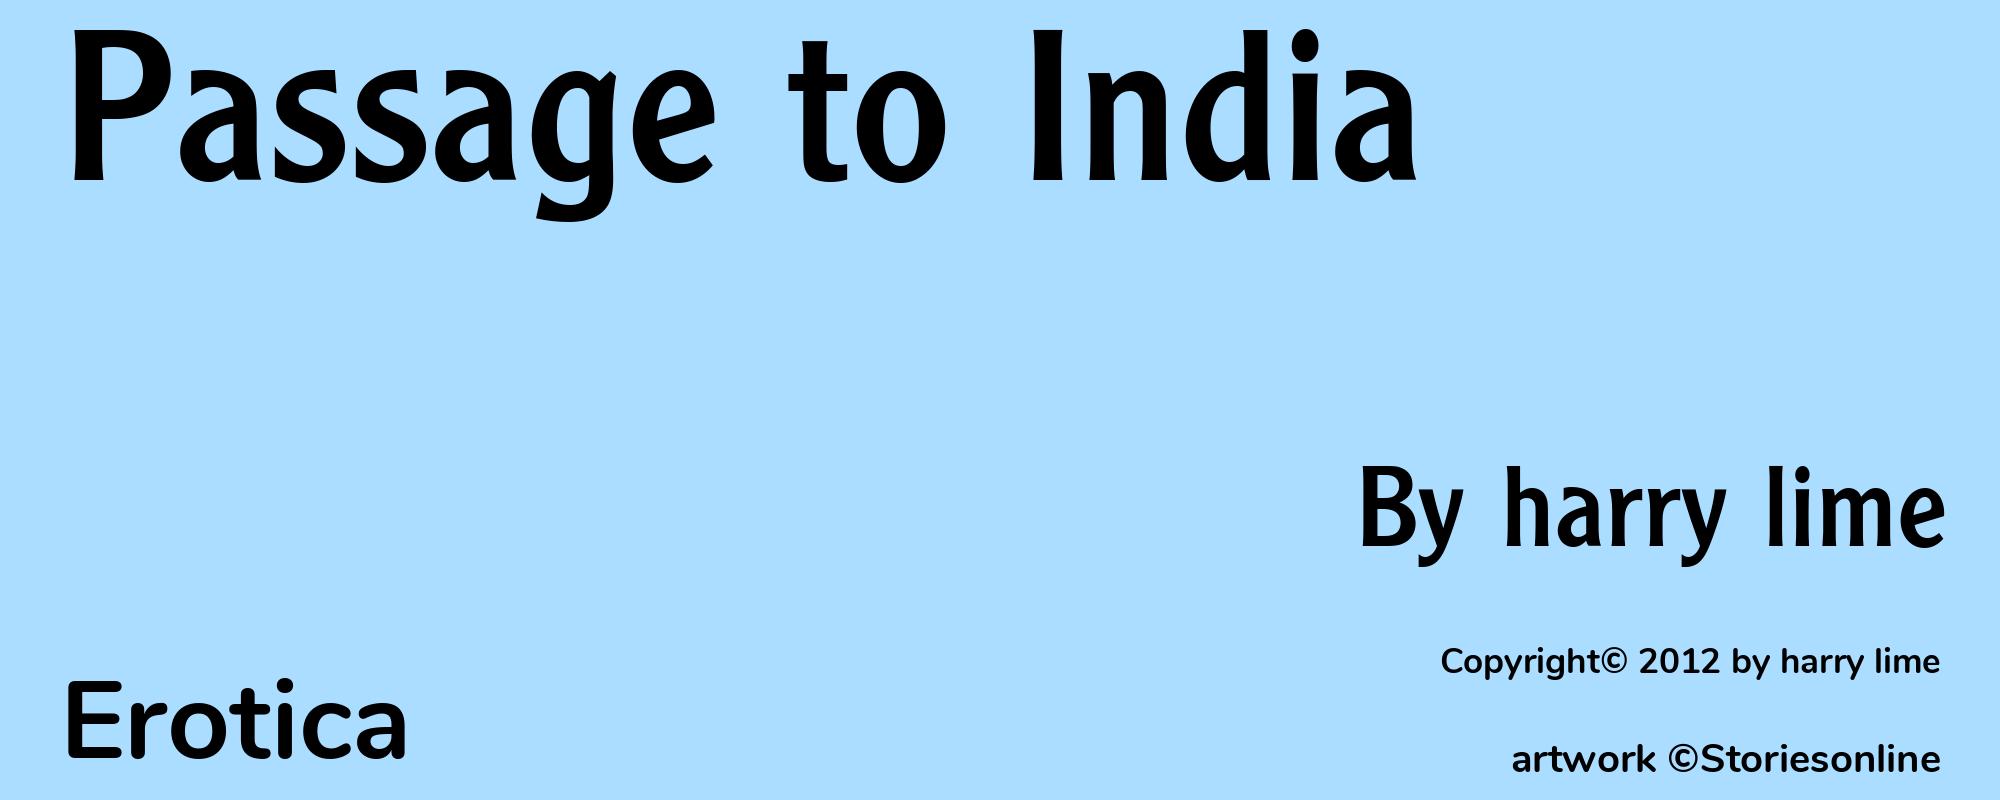 Passage to India - Cover